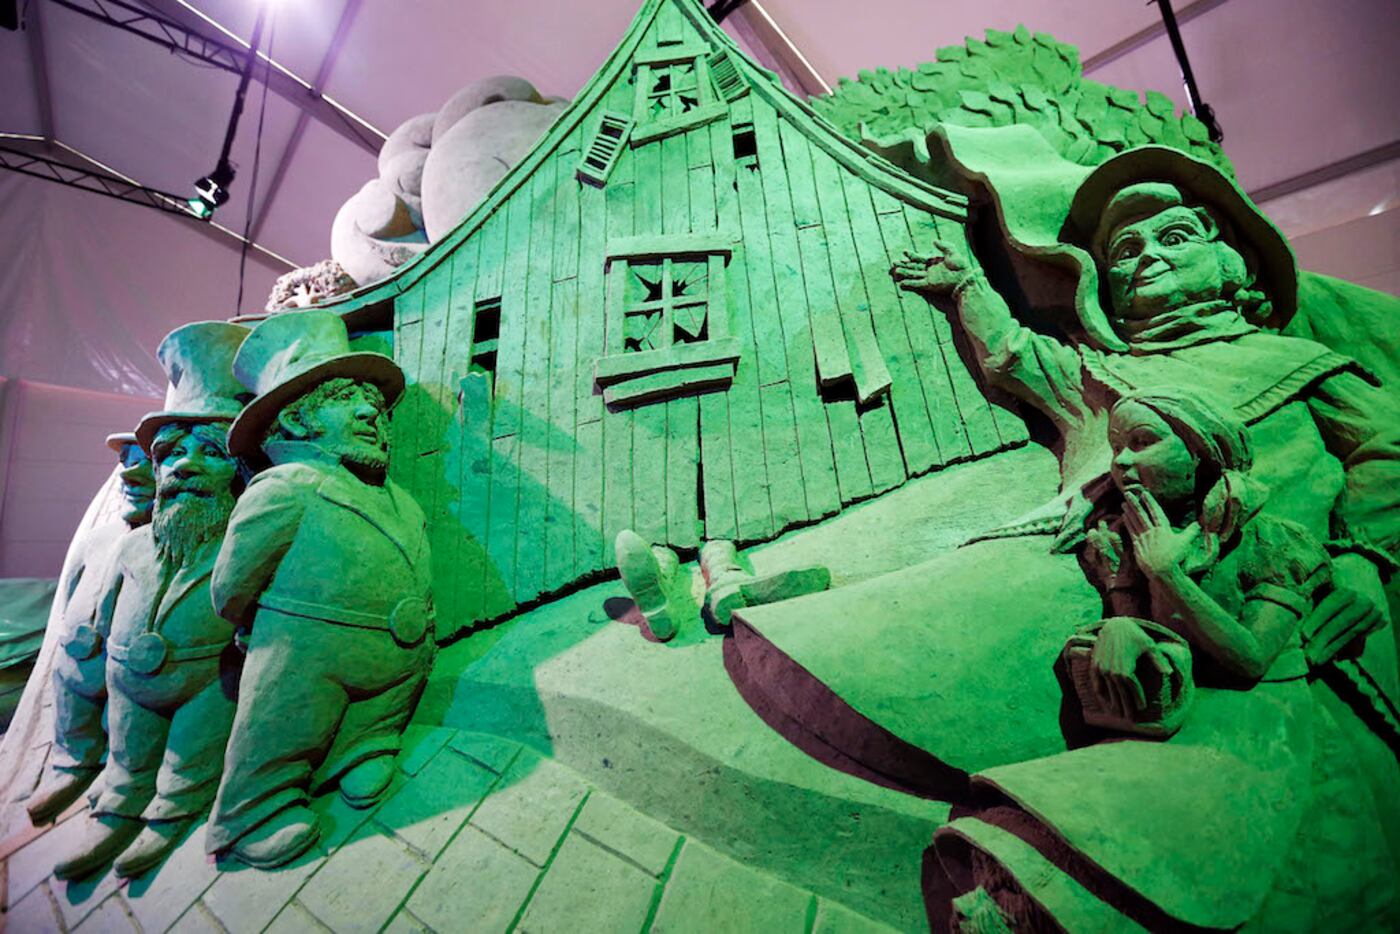 A sand sculpture depicting Dorothy's house landing on the Wicked Witch of the East